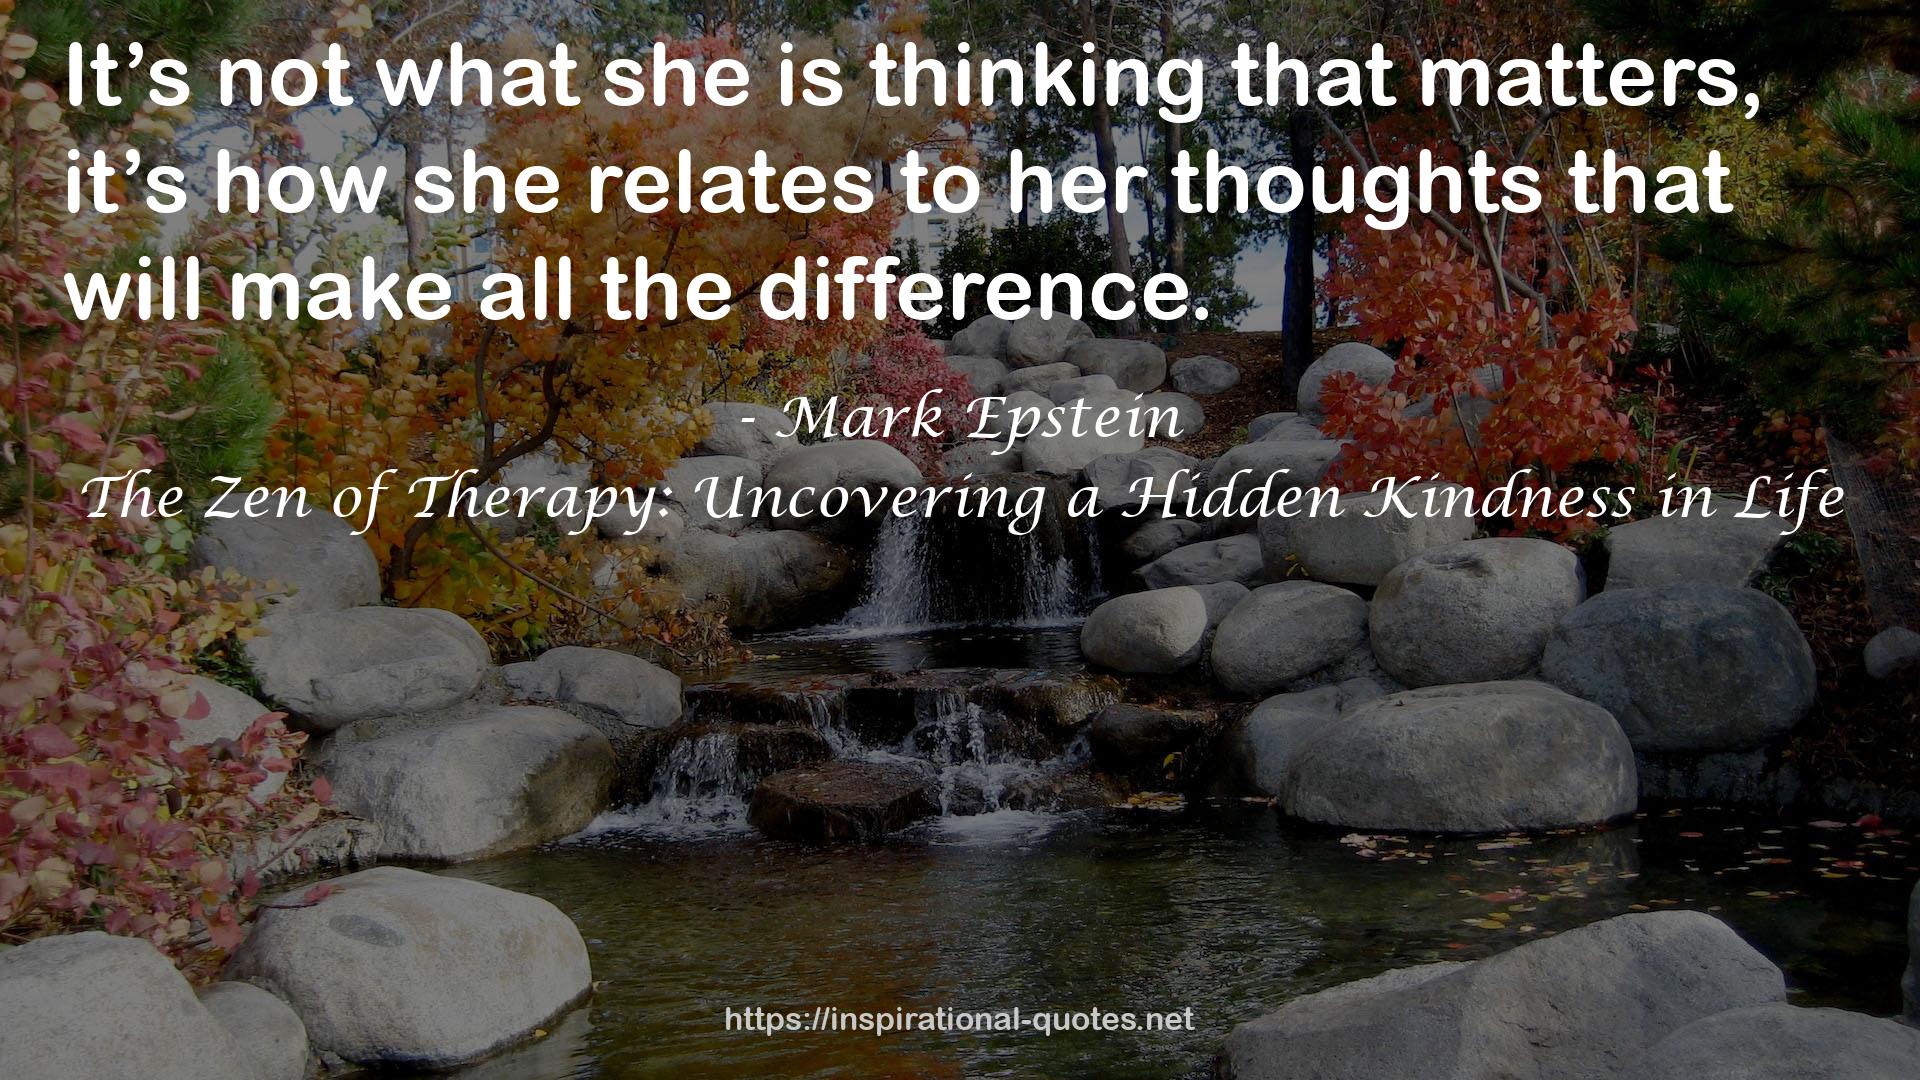 The Zen of Therapy: Uncovering a Hidden Kindness in Life QUOTES